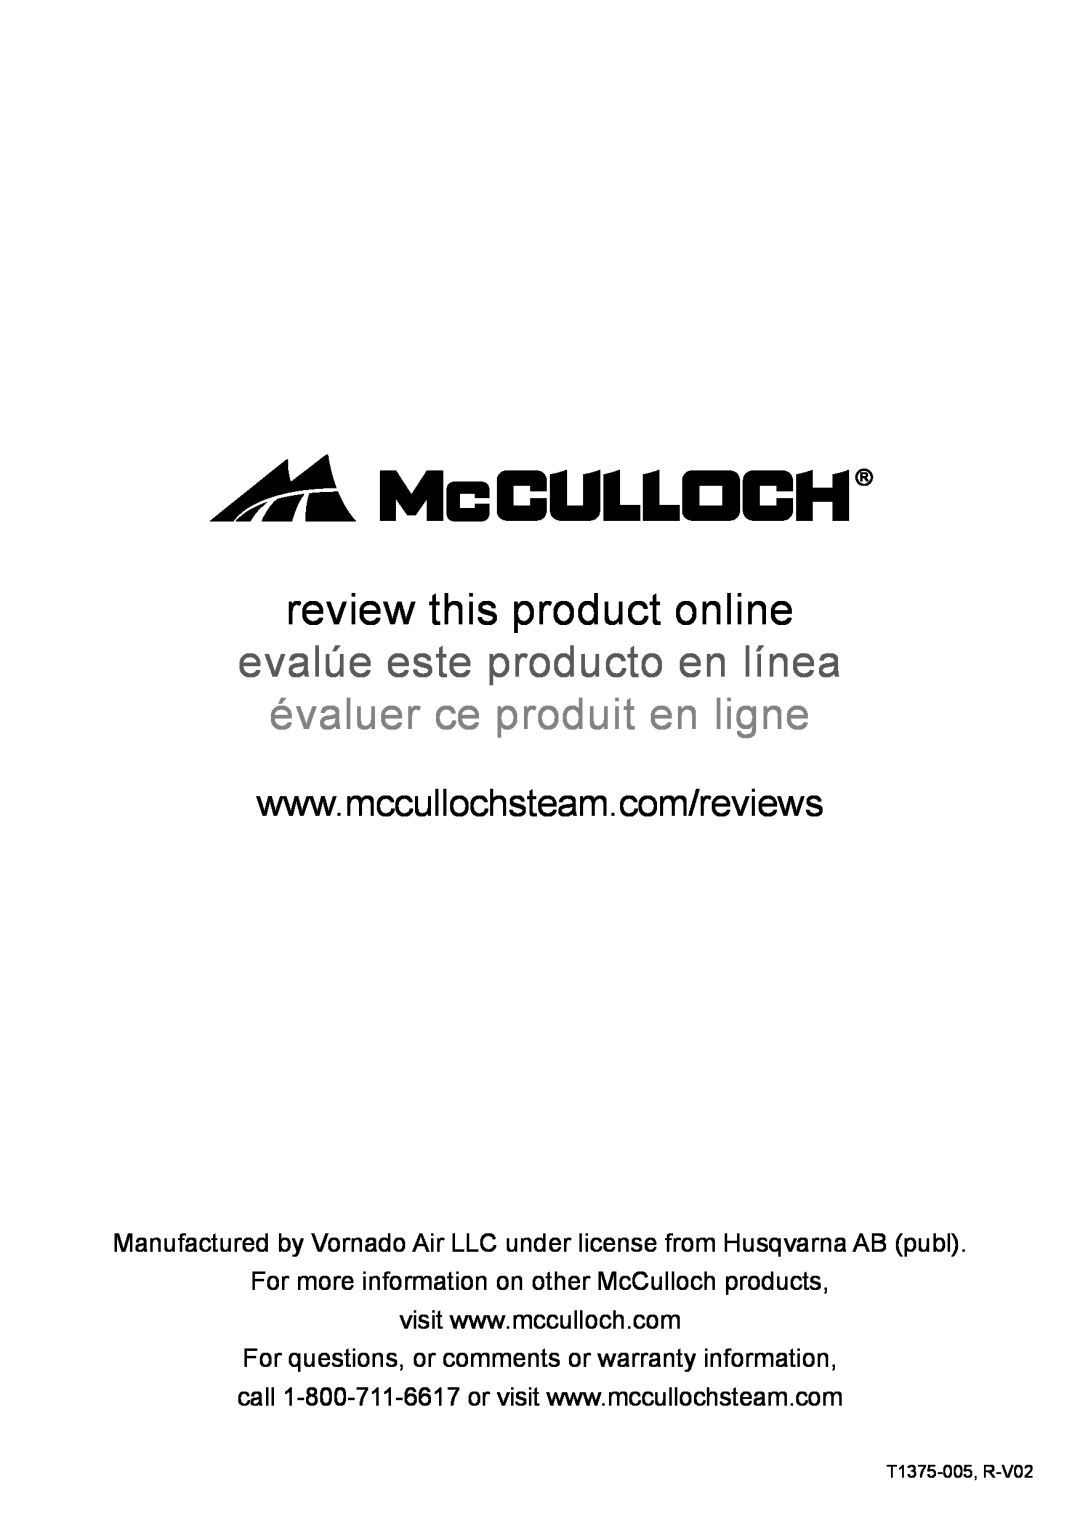 McCulloch MC1375 warranty Manufactured by Vornado Air LLC under license from Husqvarna AB publ, review this product online 